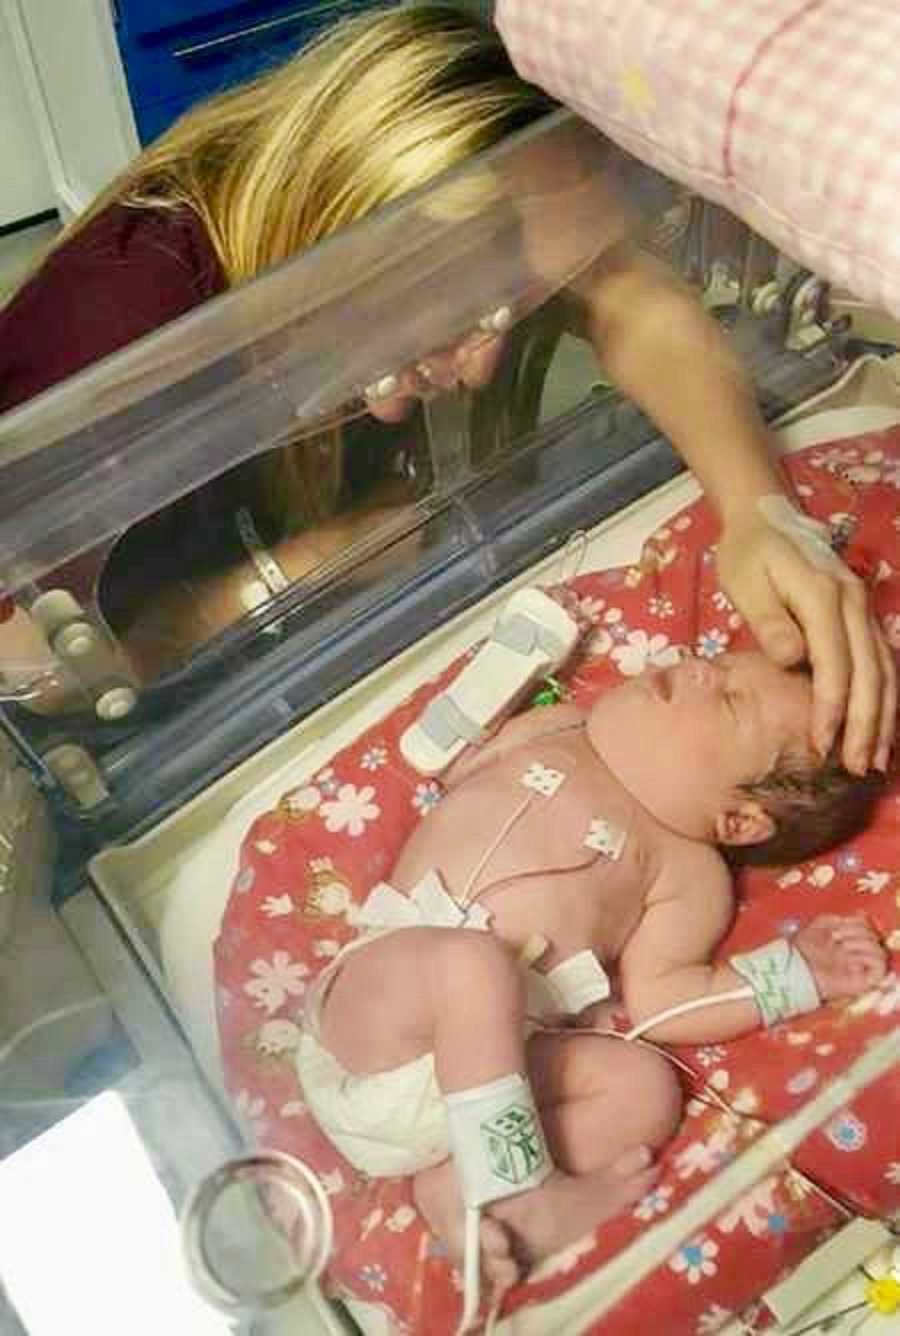 Baby with cystic hygroma lays in Children's Hospital hooked up to monitors as her mother rests hand on her head